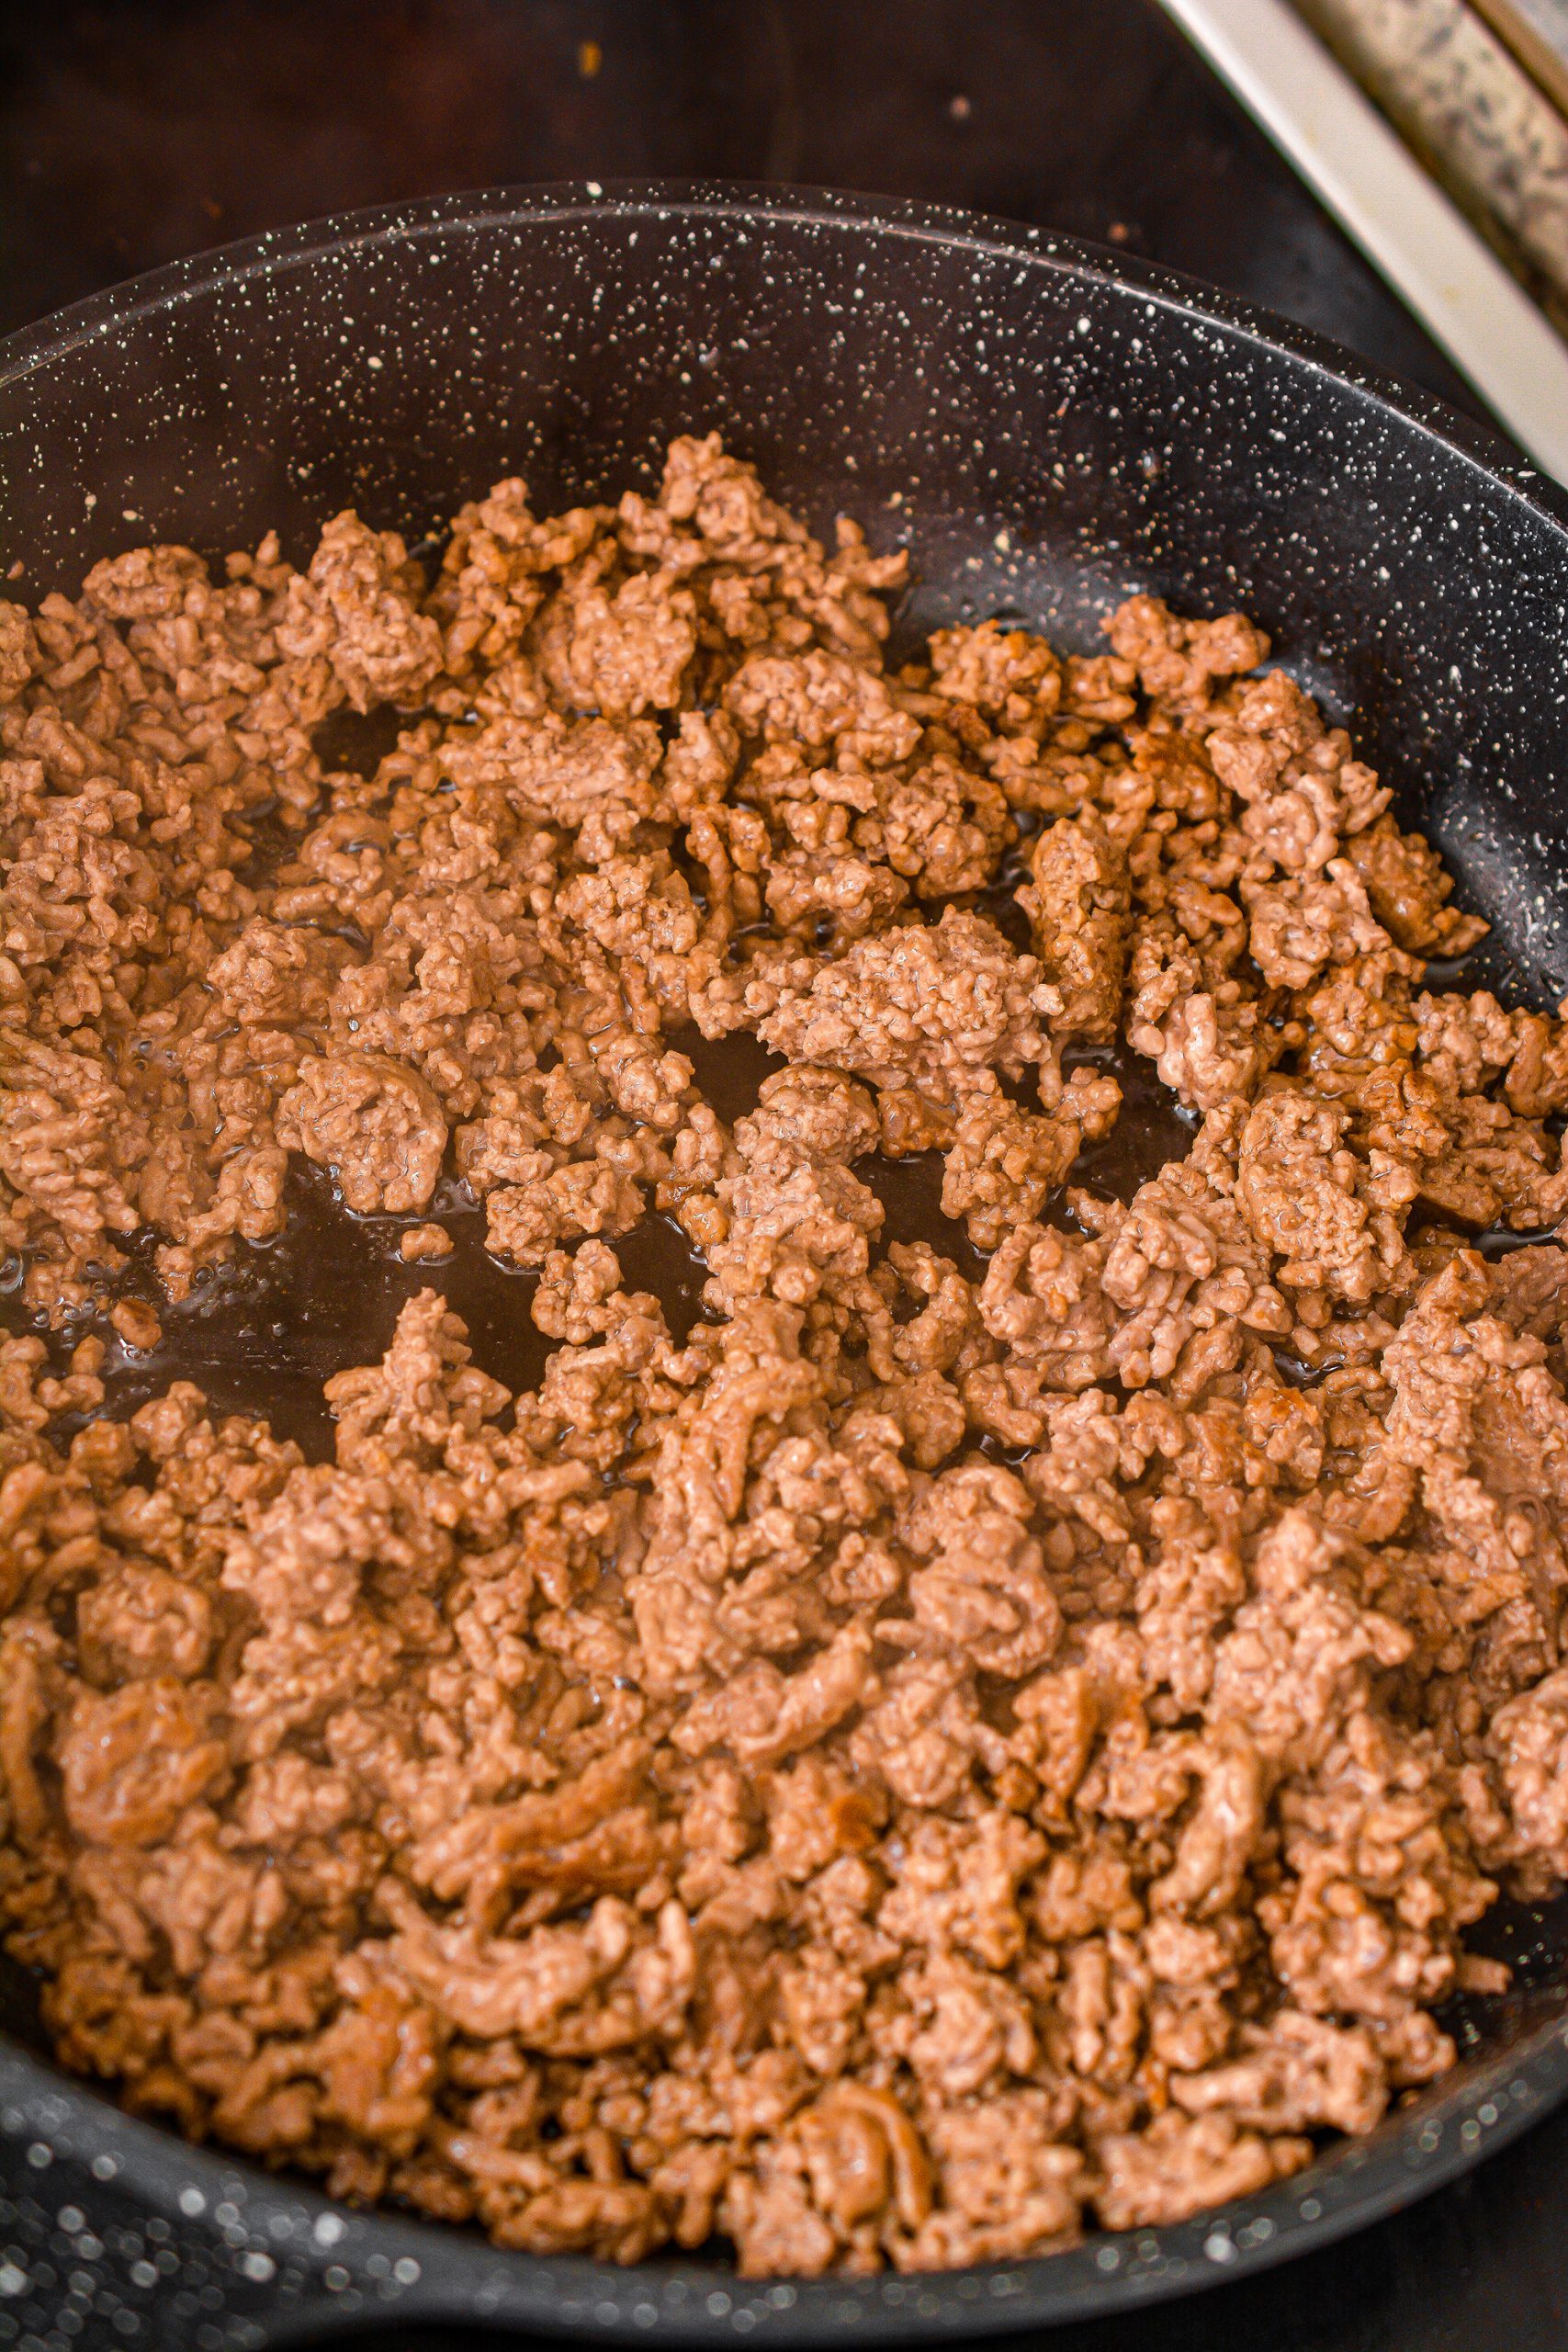 Cook the beef in a skillet over medium-high heat until browned completely. Set aside.